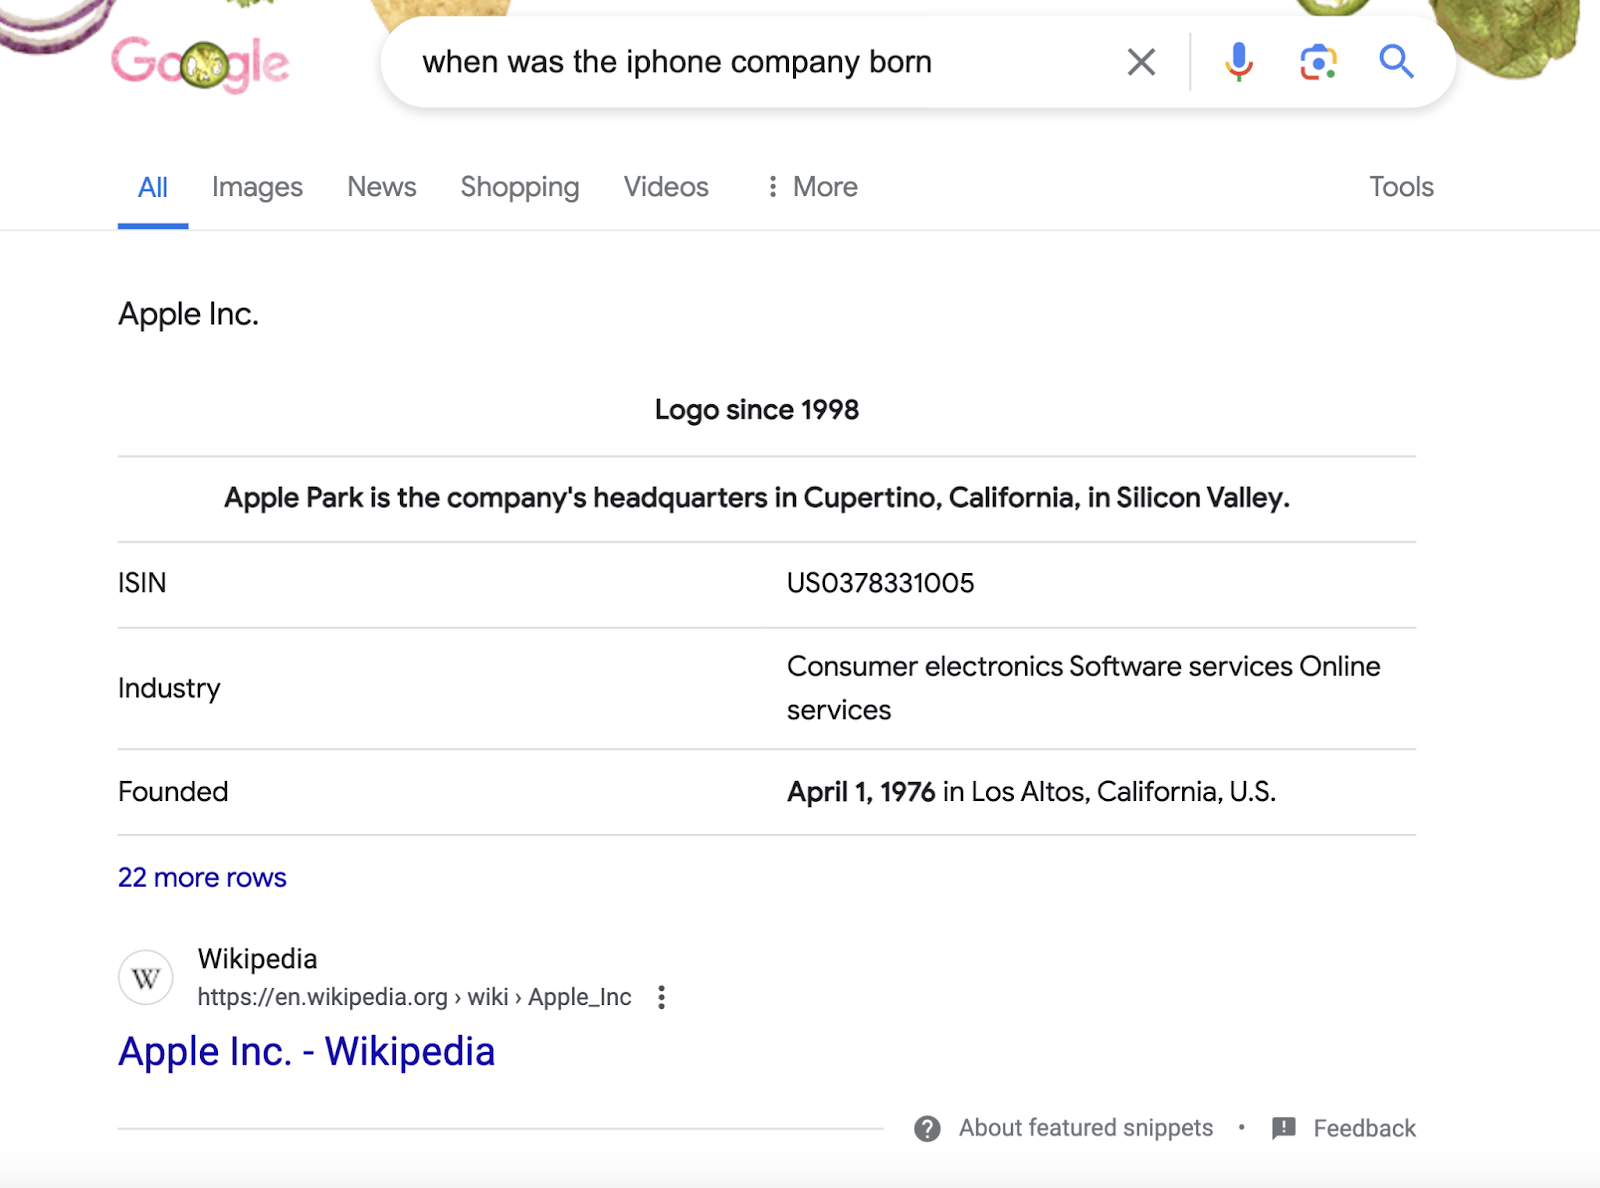 featured snippet shows date of apple's founding from wikipedia